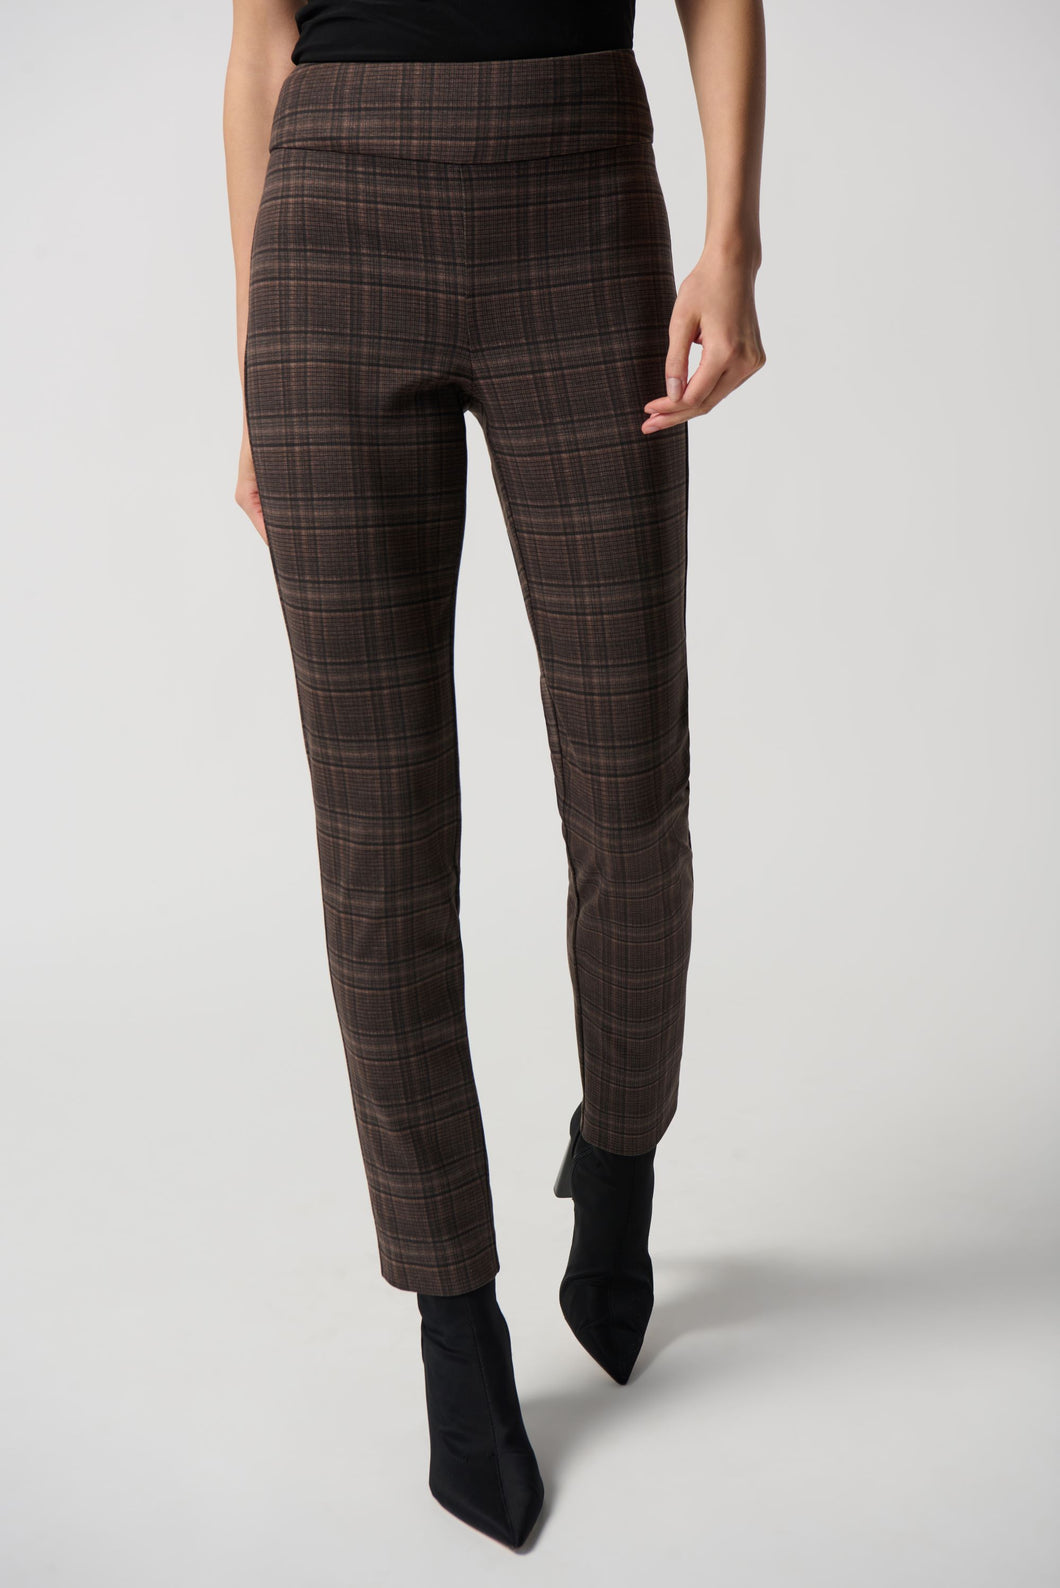 Heavy Knit Plaid Pull-On Pants by Joseph Ribkoff (available in plus sizes)